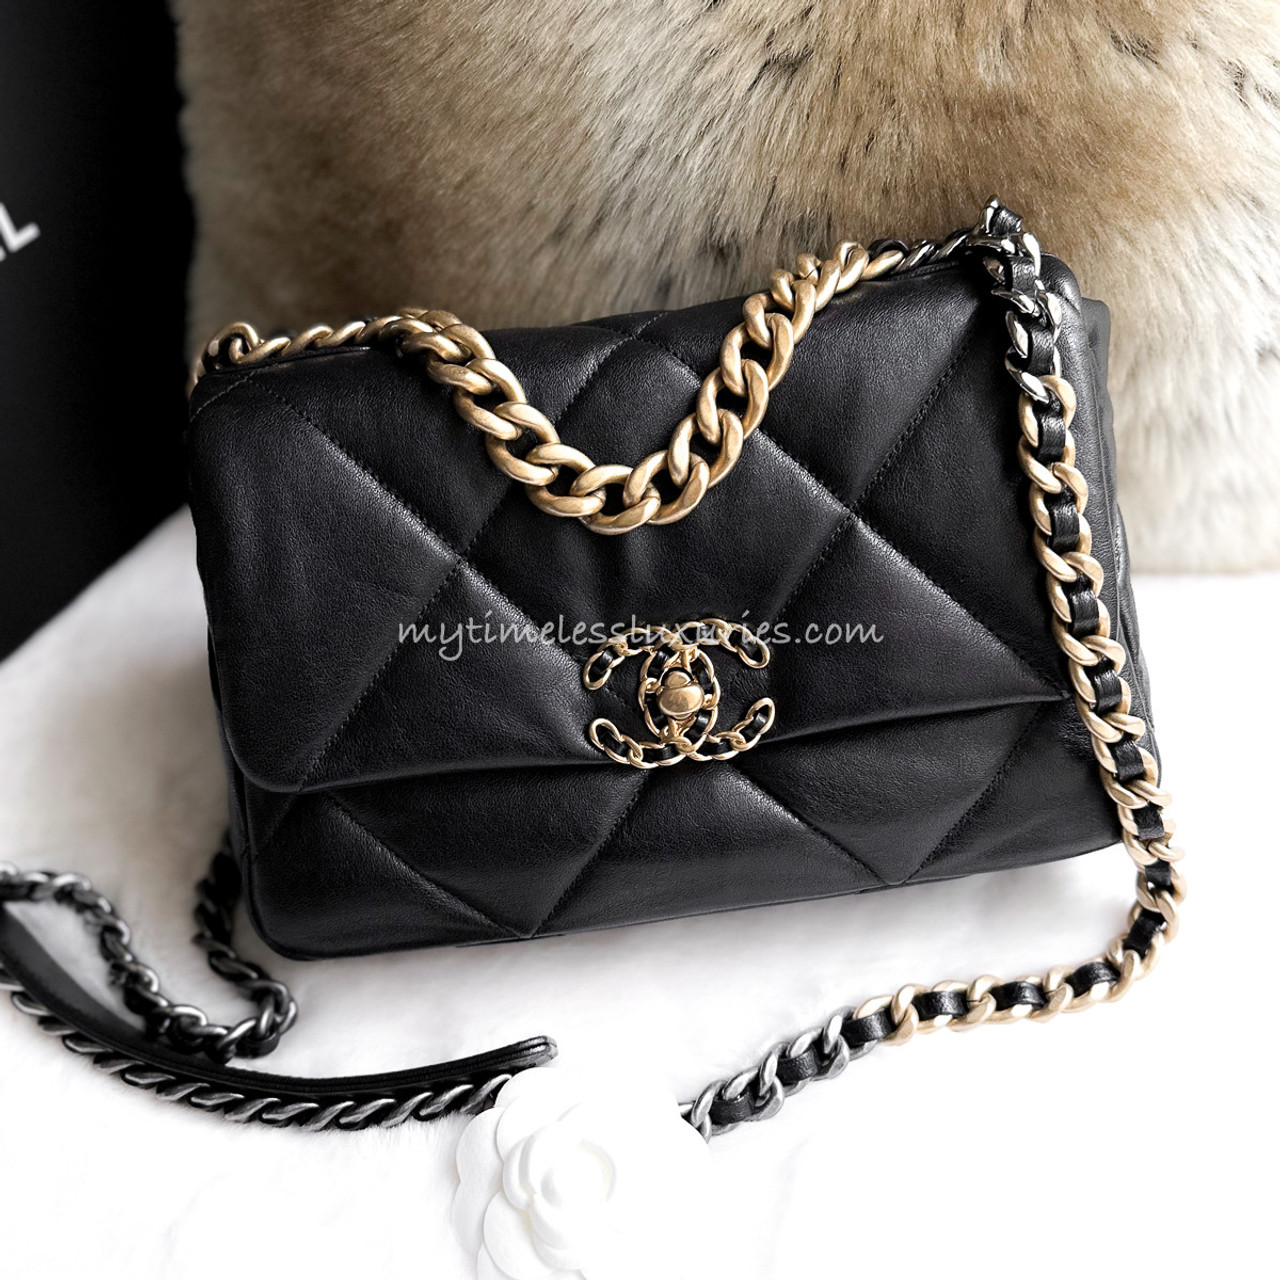 CHANEL Black Lambskin Small 19 Bag Mix Hw  Timeless Luxuries